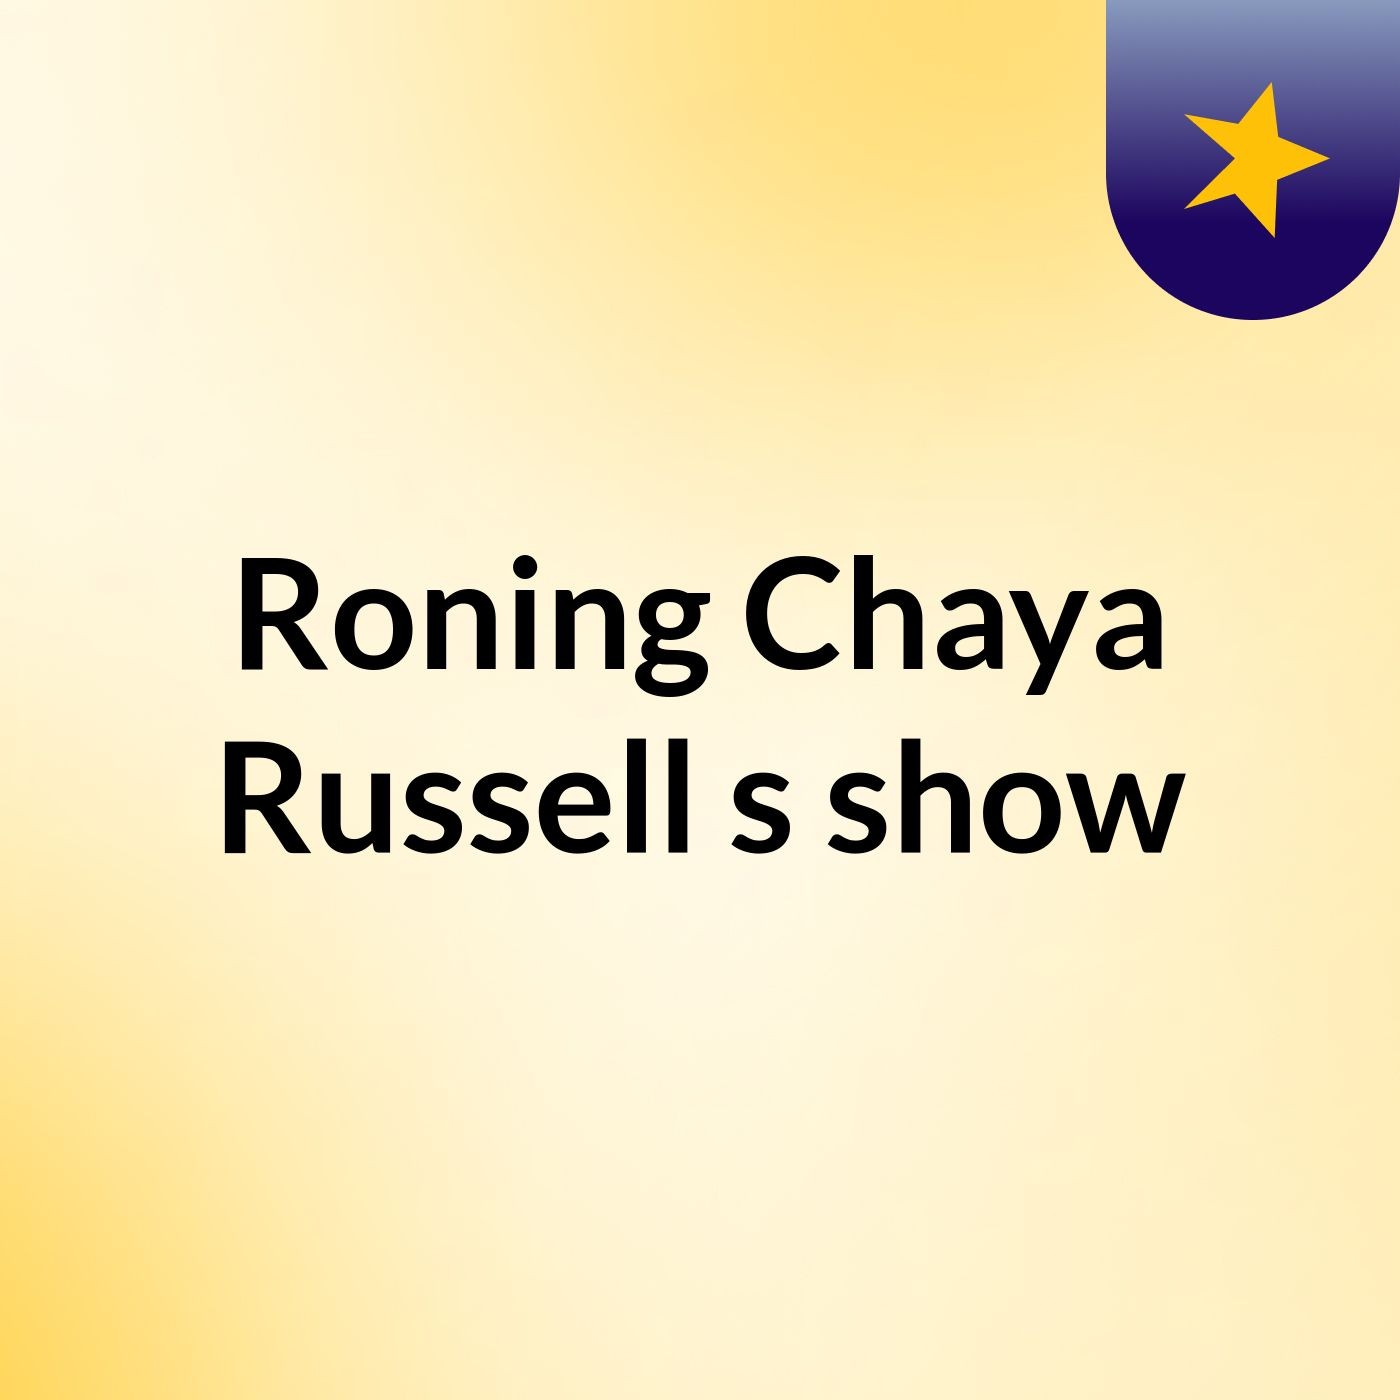 Roning Chaya Russell's show